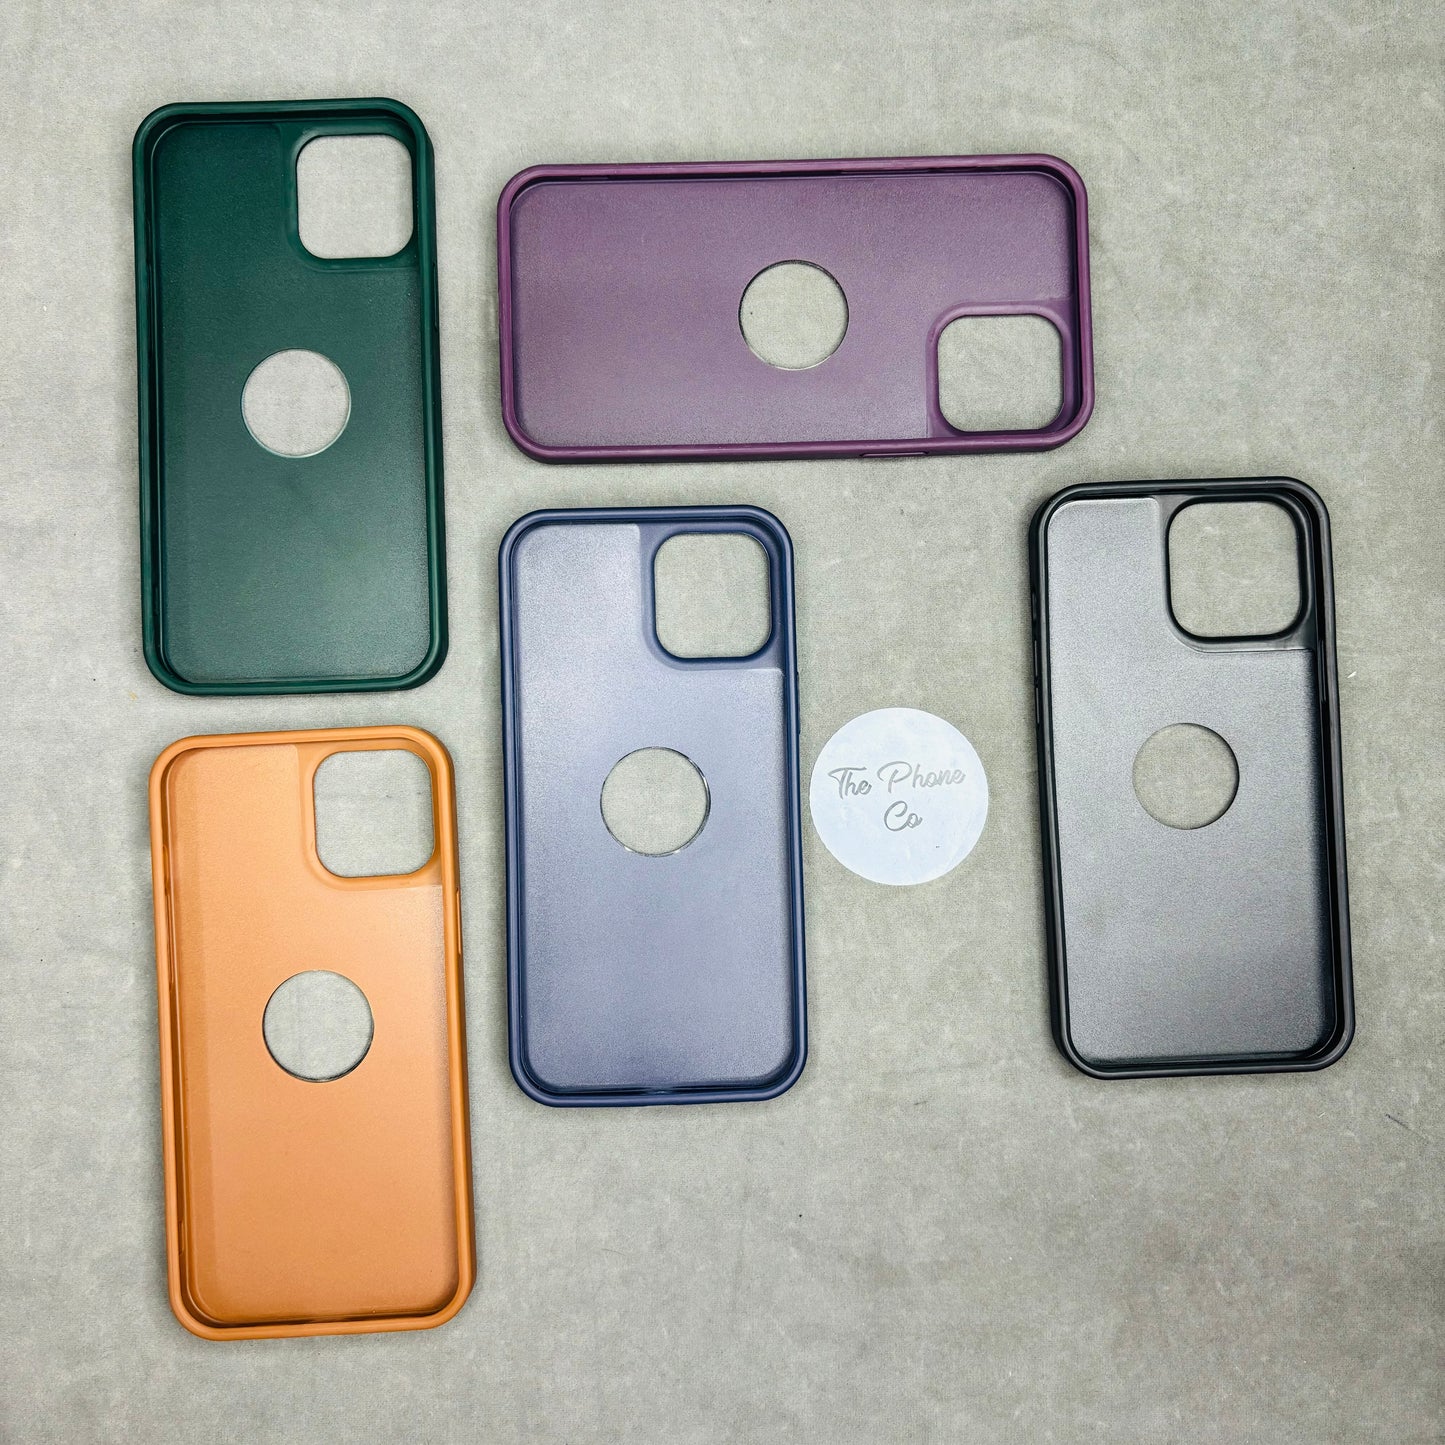 Premium Dotted Leather Case for iPhone